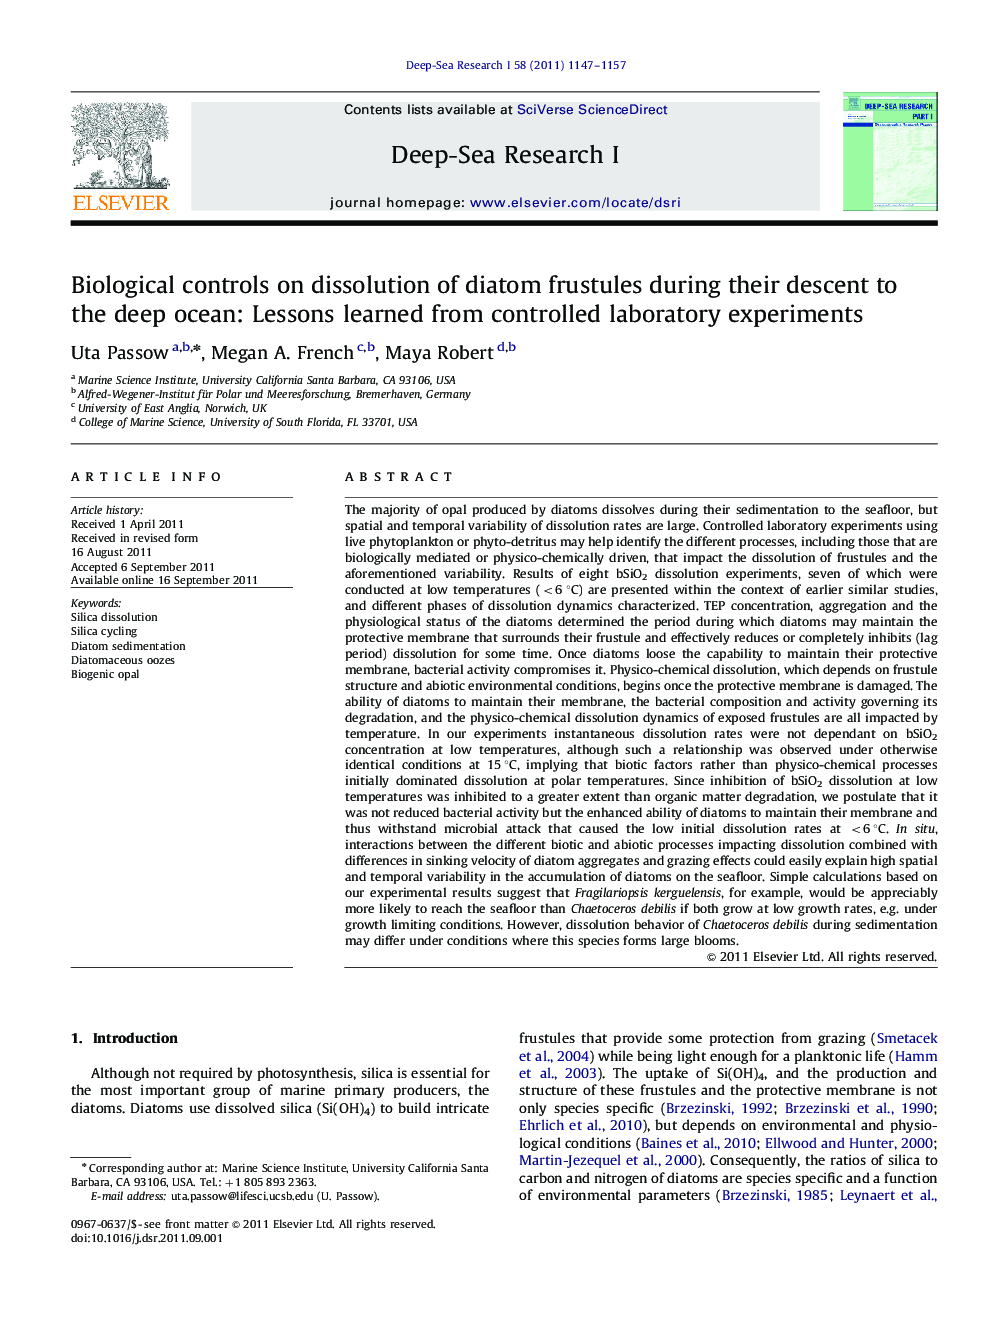 Biological controls on dissolution of diatom frustules during their descent to the deep ocean: Lessons learned from controlled laboratory experiments